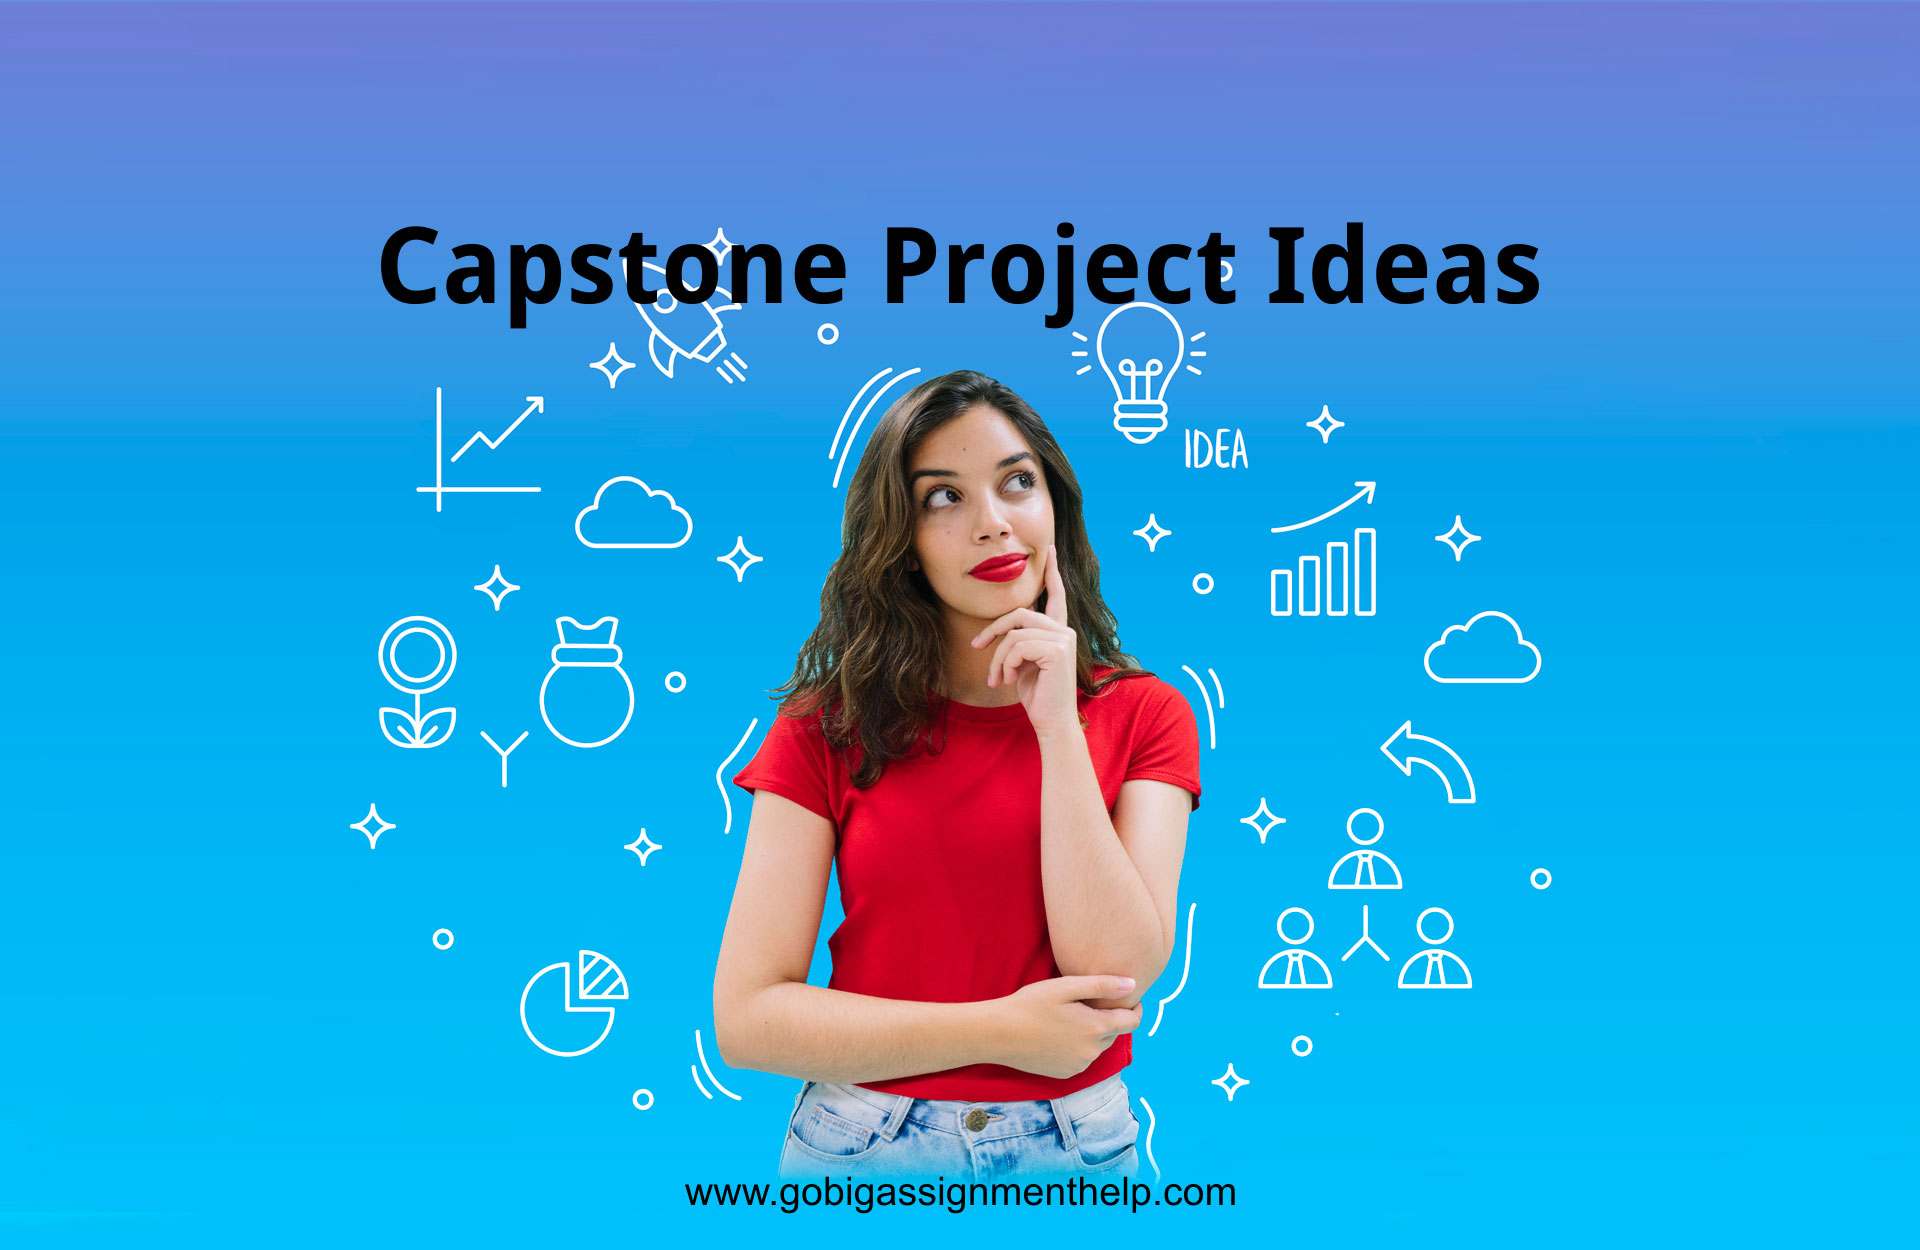 list of capstone project ideas for beginners